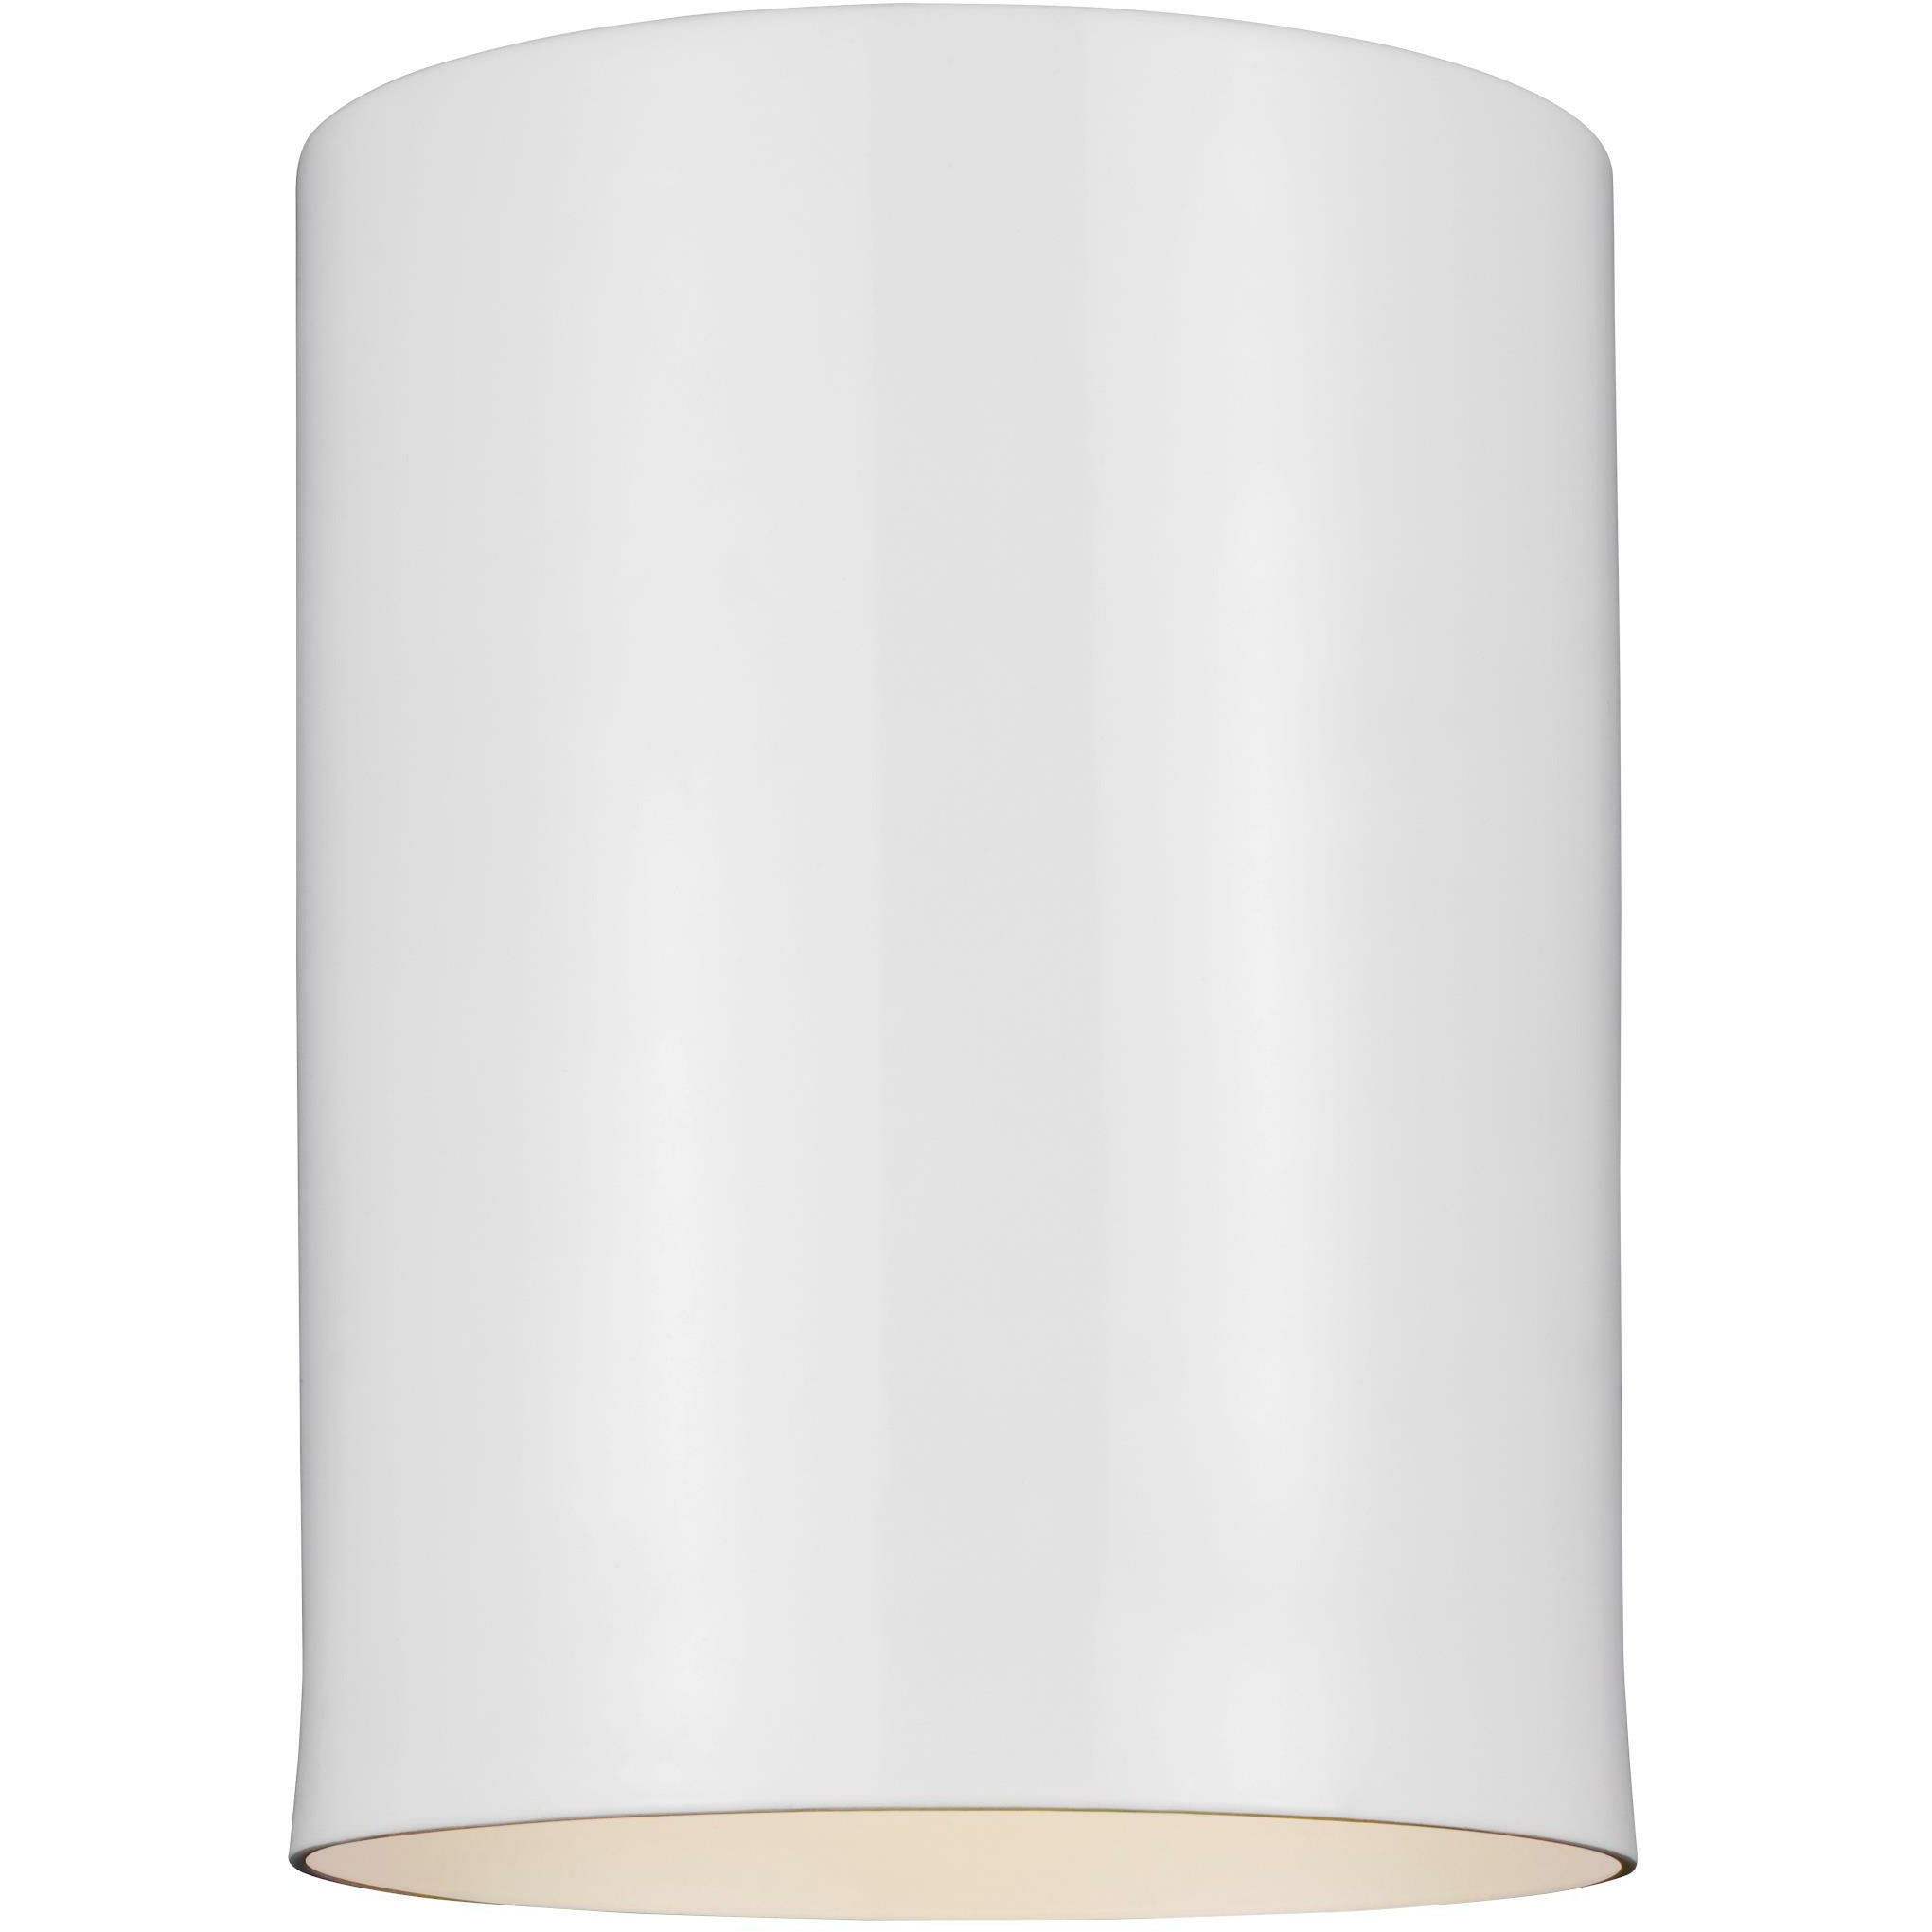 Outdoor Cylinders Outdoor Ceiling Light White